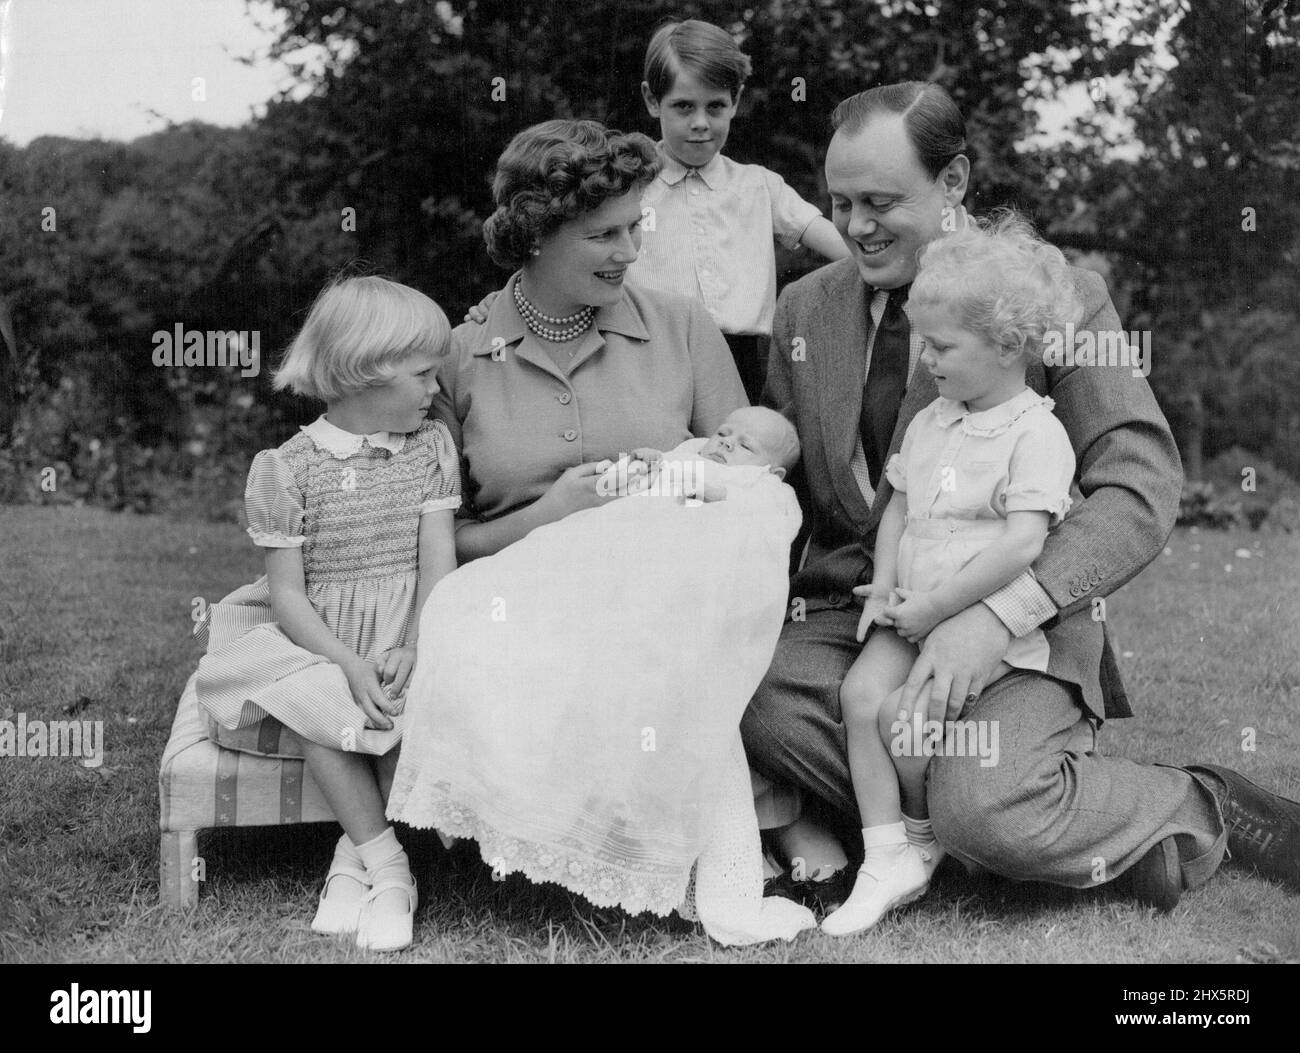 Family Favourite -- Charlotte Clementine, Aged six weeks, month and latest grandchild of British Premier Sir Winston Churchill, holds the firm interest of her own immediate family - mother, Mary Soames, father, Captain Christopher Soames, sister Emma, 4½, and brothers Nicholas, 6½, and Jeremy, 2, at their home at Chartwell Farm, Westerham, Kent. Captain Soames is Member of Parliament for the Bedford Division of Bedfordshire. Mrs. Soames is the daughter of Sir Winston and Lady Churchill. August 25, 1954. (Photo by Reuterphoto). Stock Photo